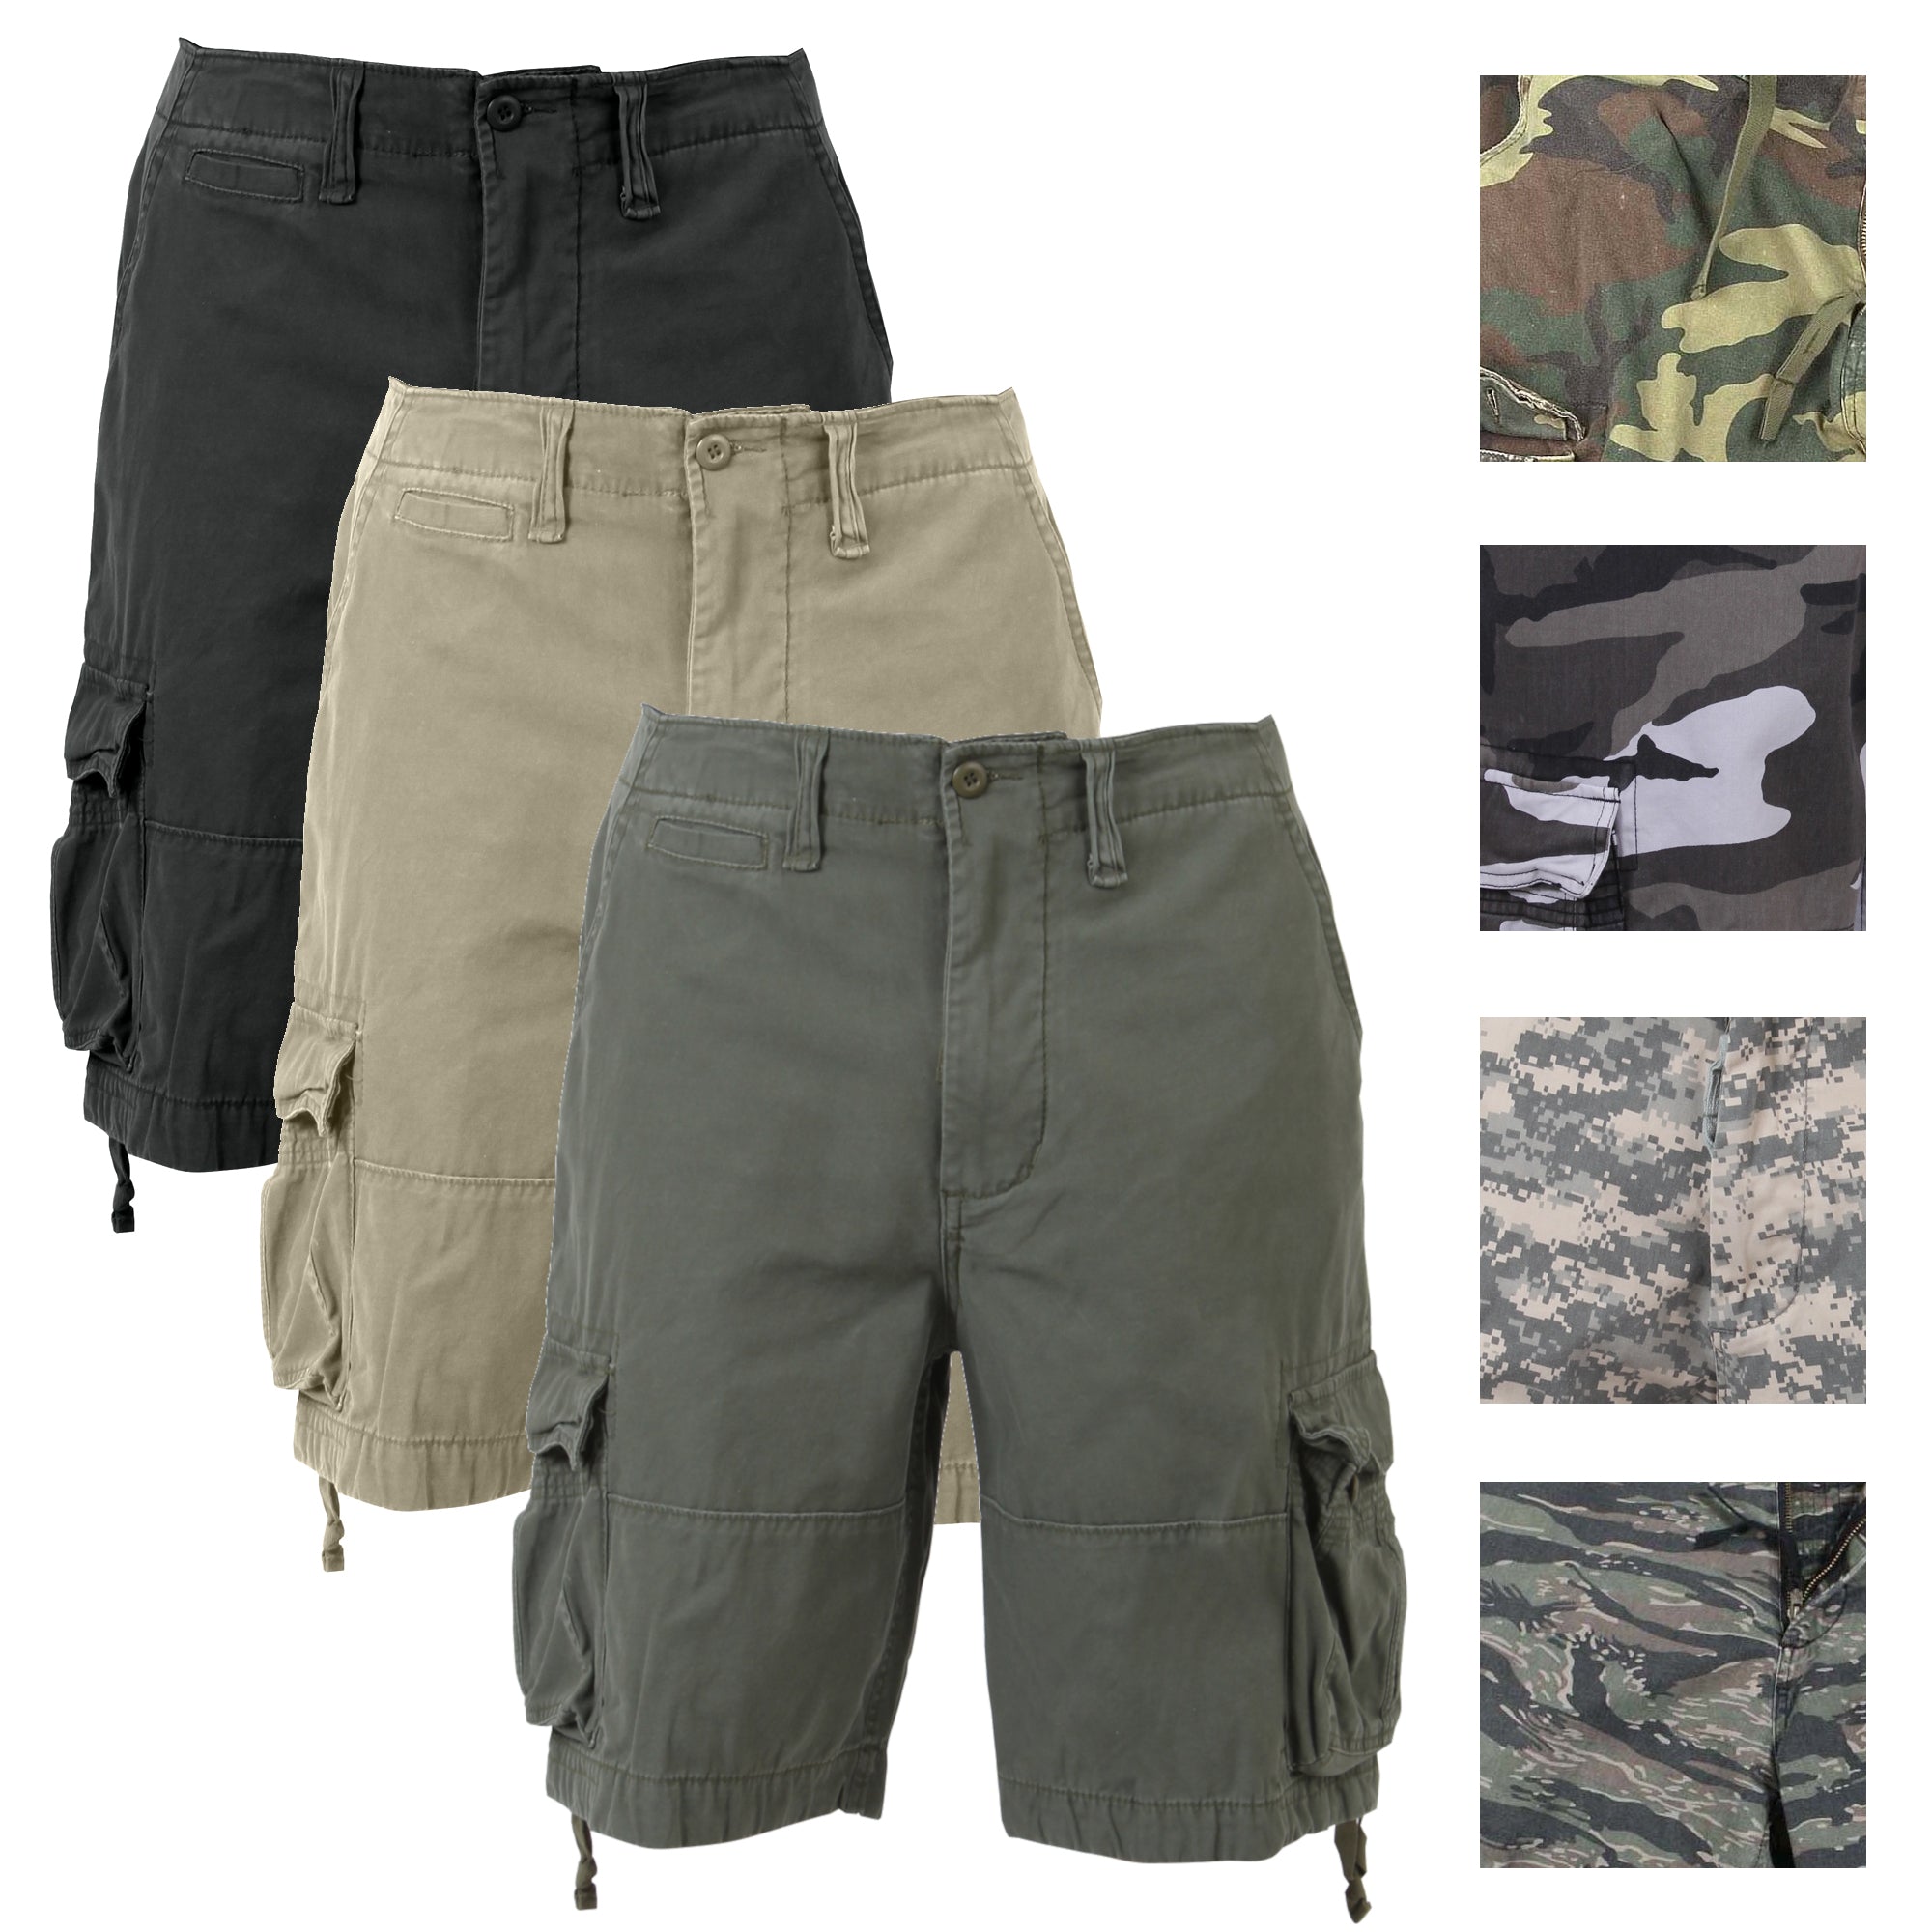 Rothco's Vintage Camo Utility Shorts – Grunt Force